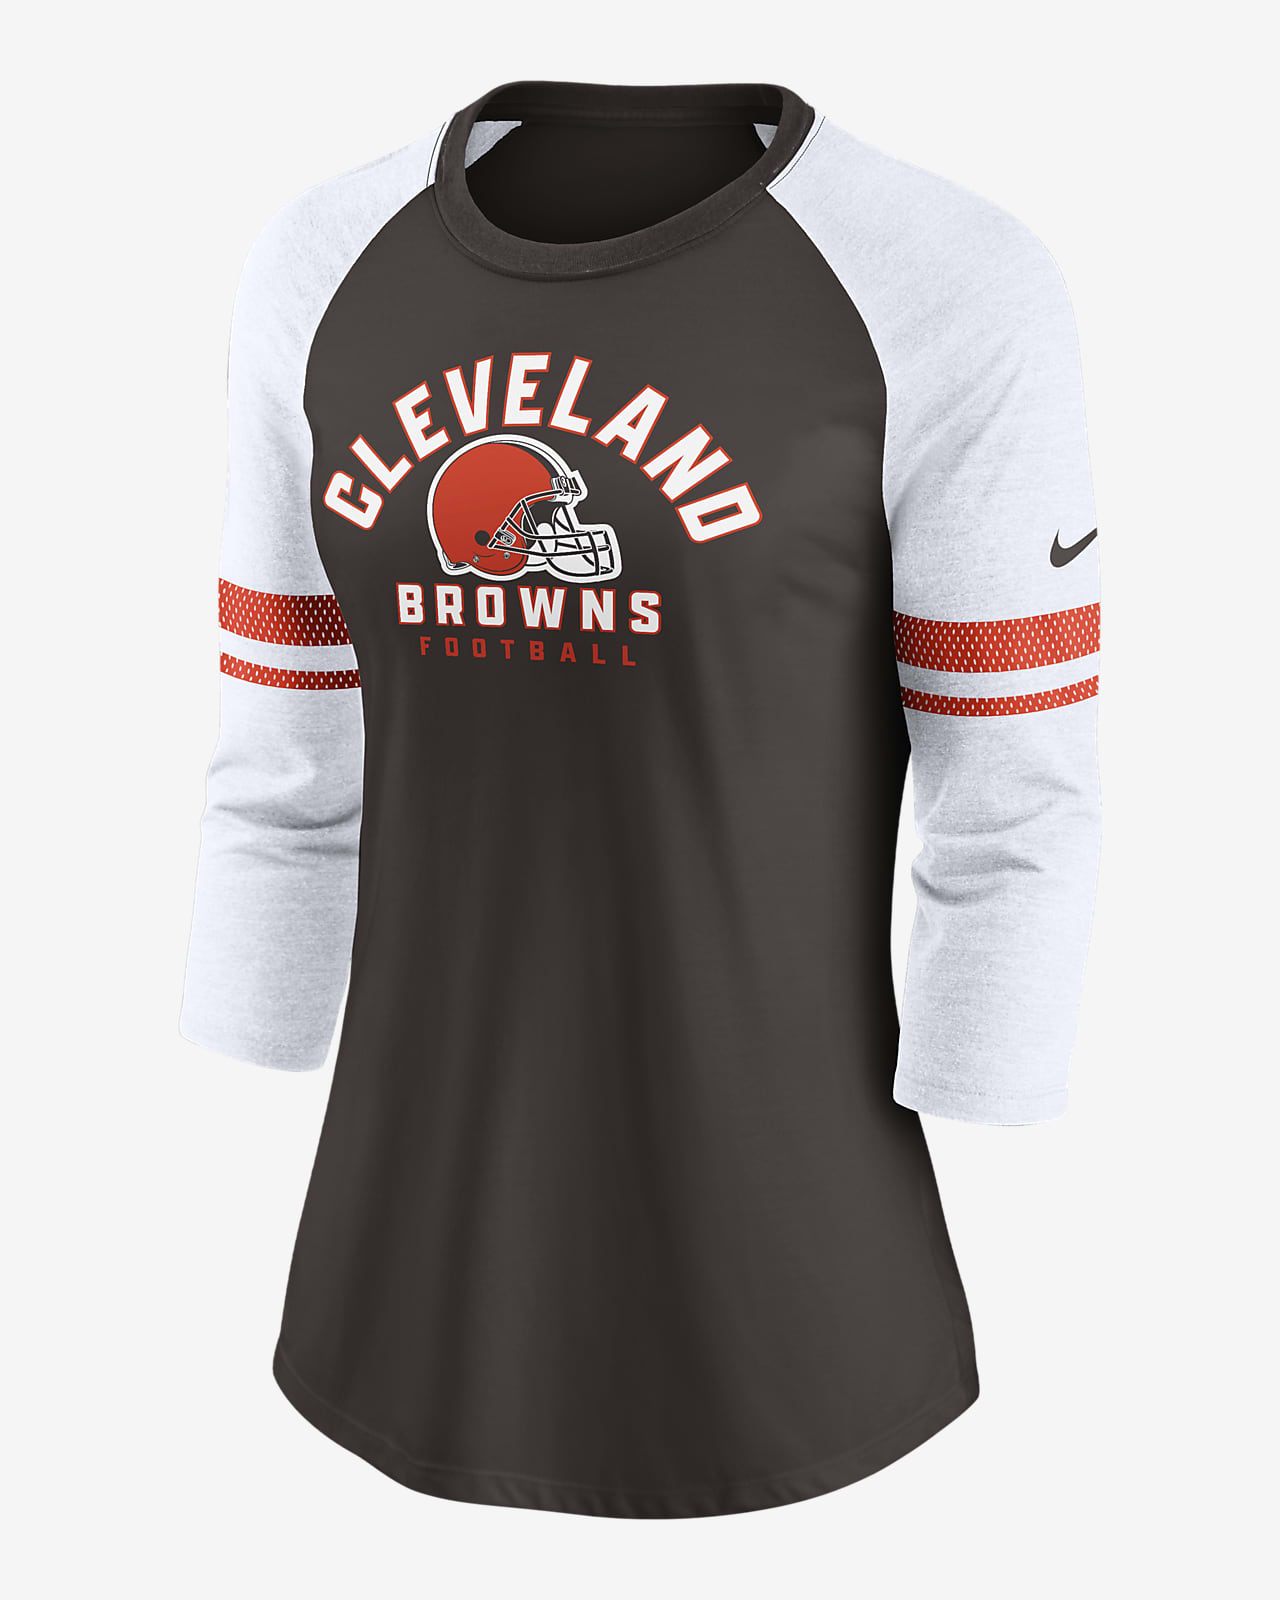 Nike Women's Fashion (NFL Cleveland Browns) 3/4-Sleeve T-Shirt in Brown, Size: Xs | NKNW560R93-06O